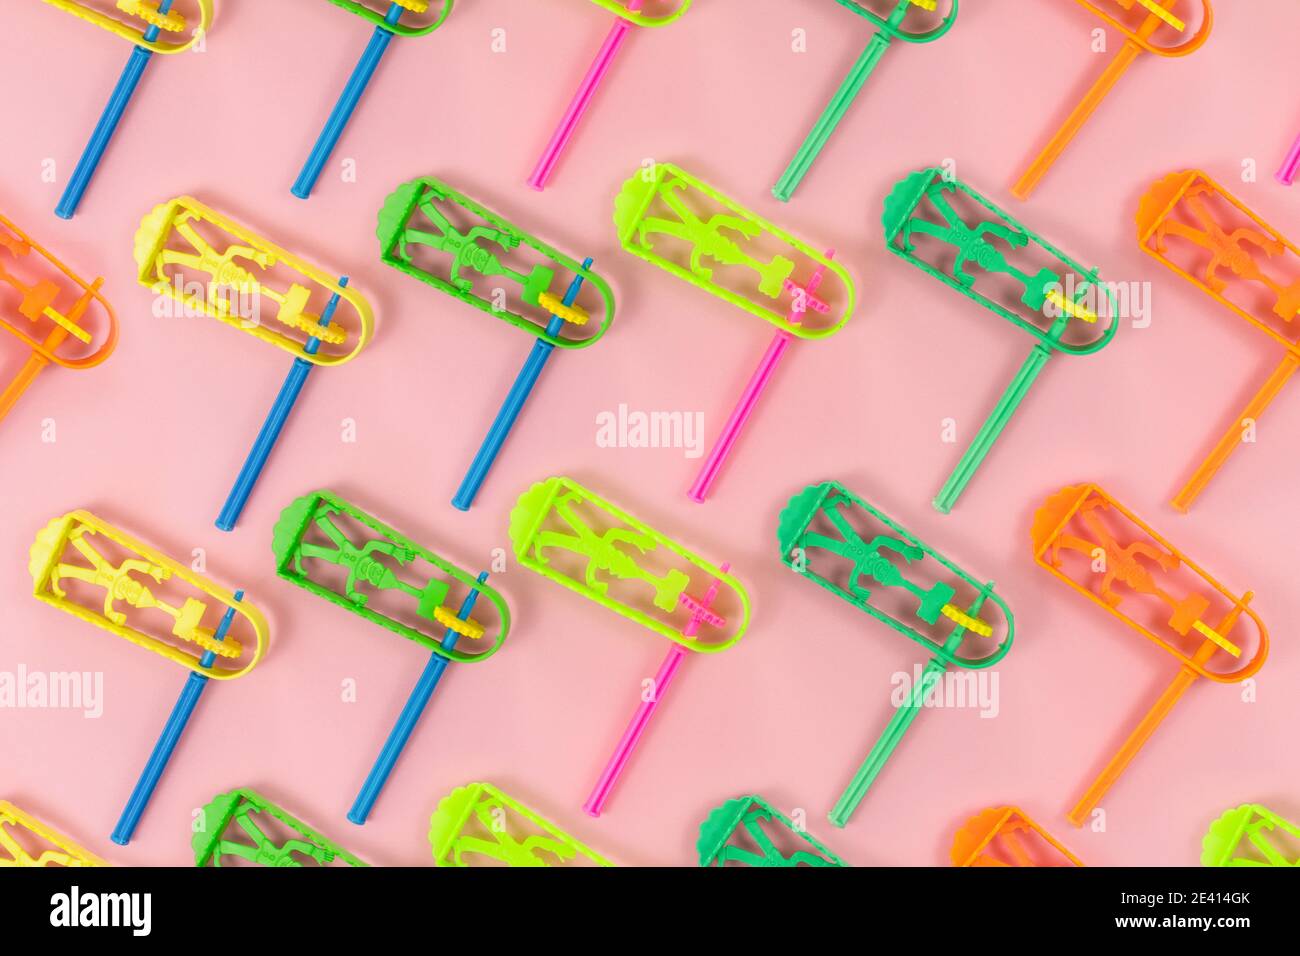 Top view of colorful Purim holiday items and toys on a pink background Stock Photo